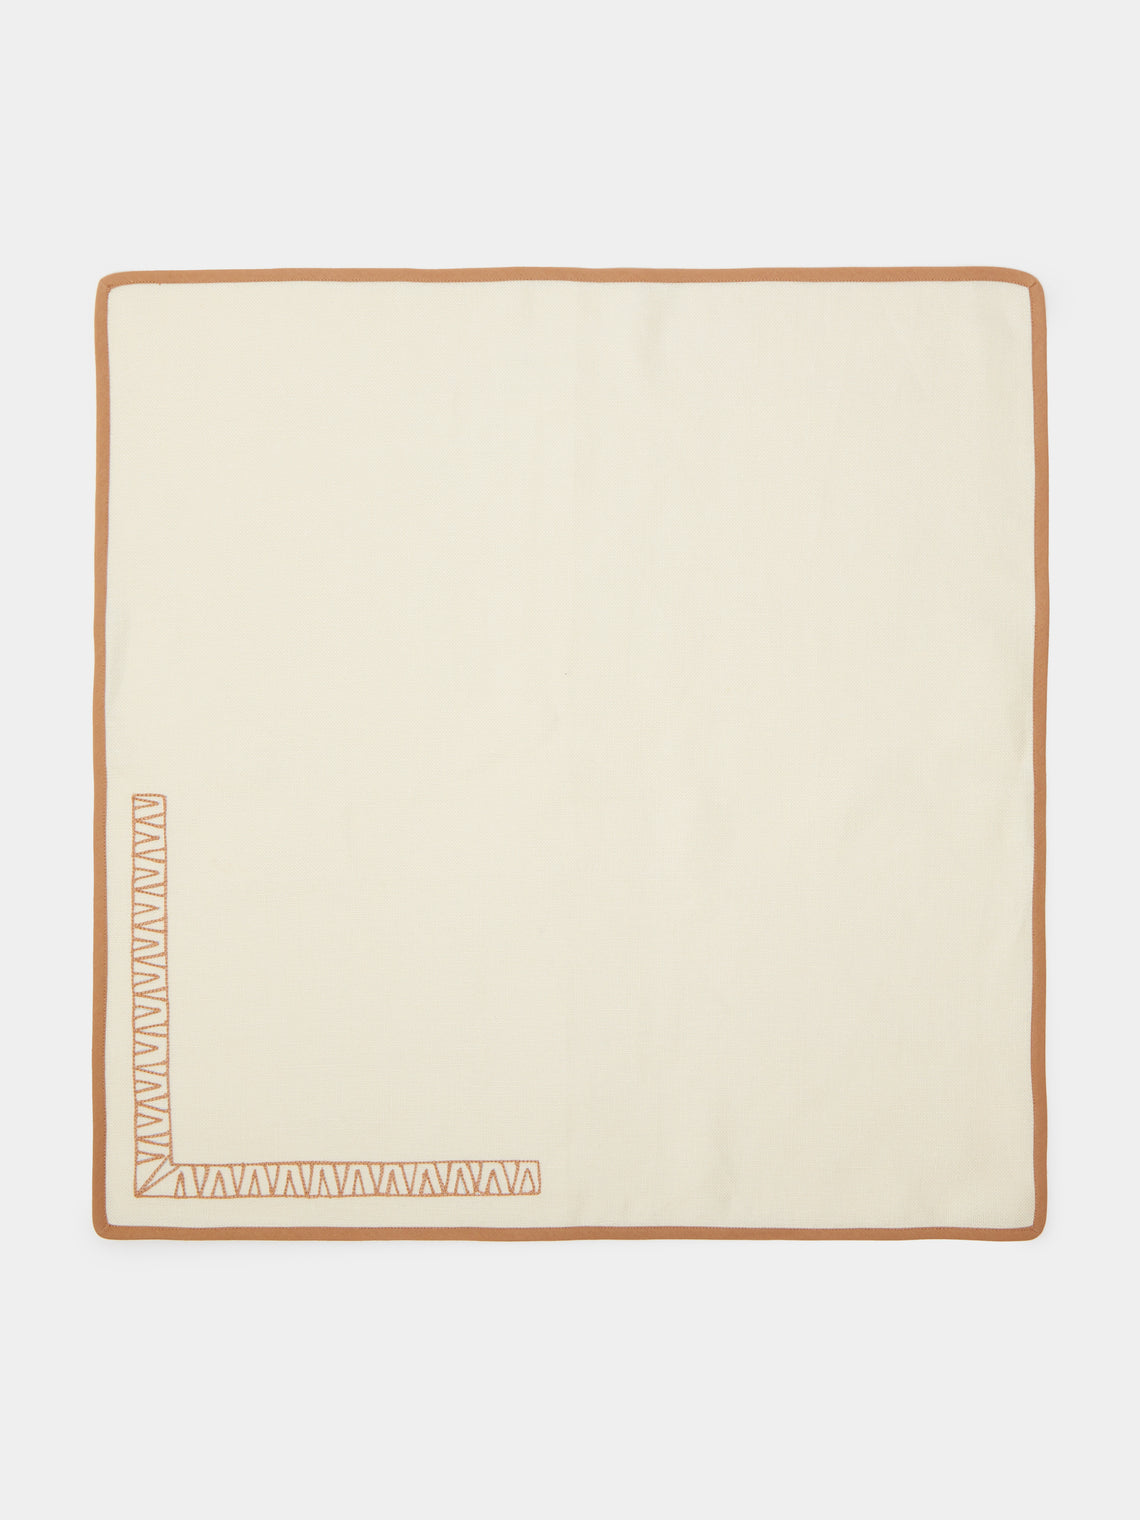 Loretta Caponi - Aztec Hand-Embroidered Linen Placemats and Napkins (Set of 2) - Beige - ABASK